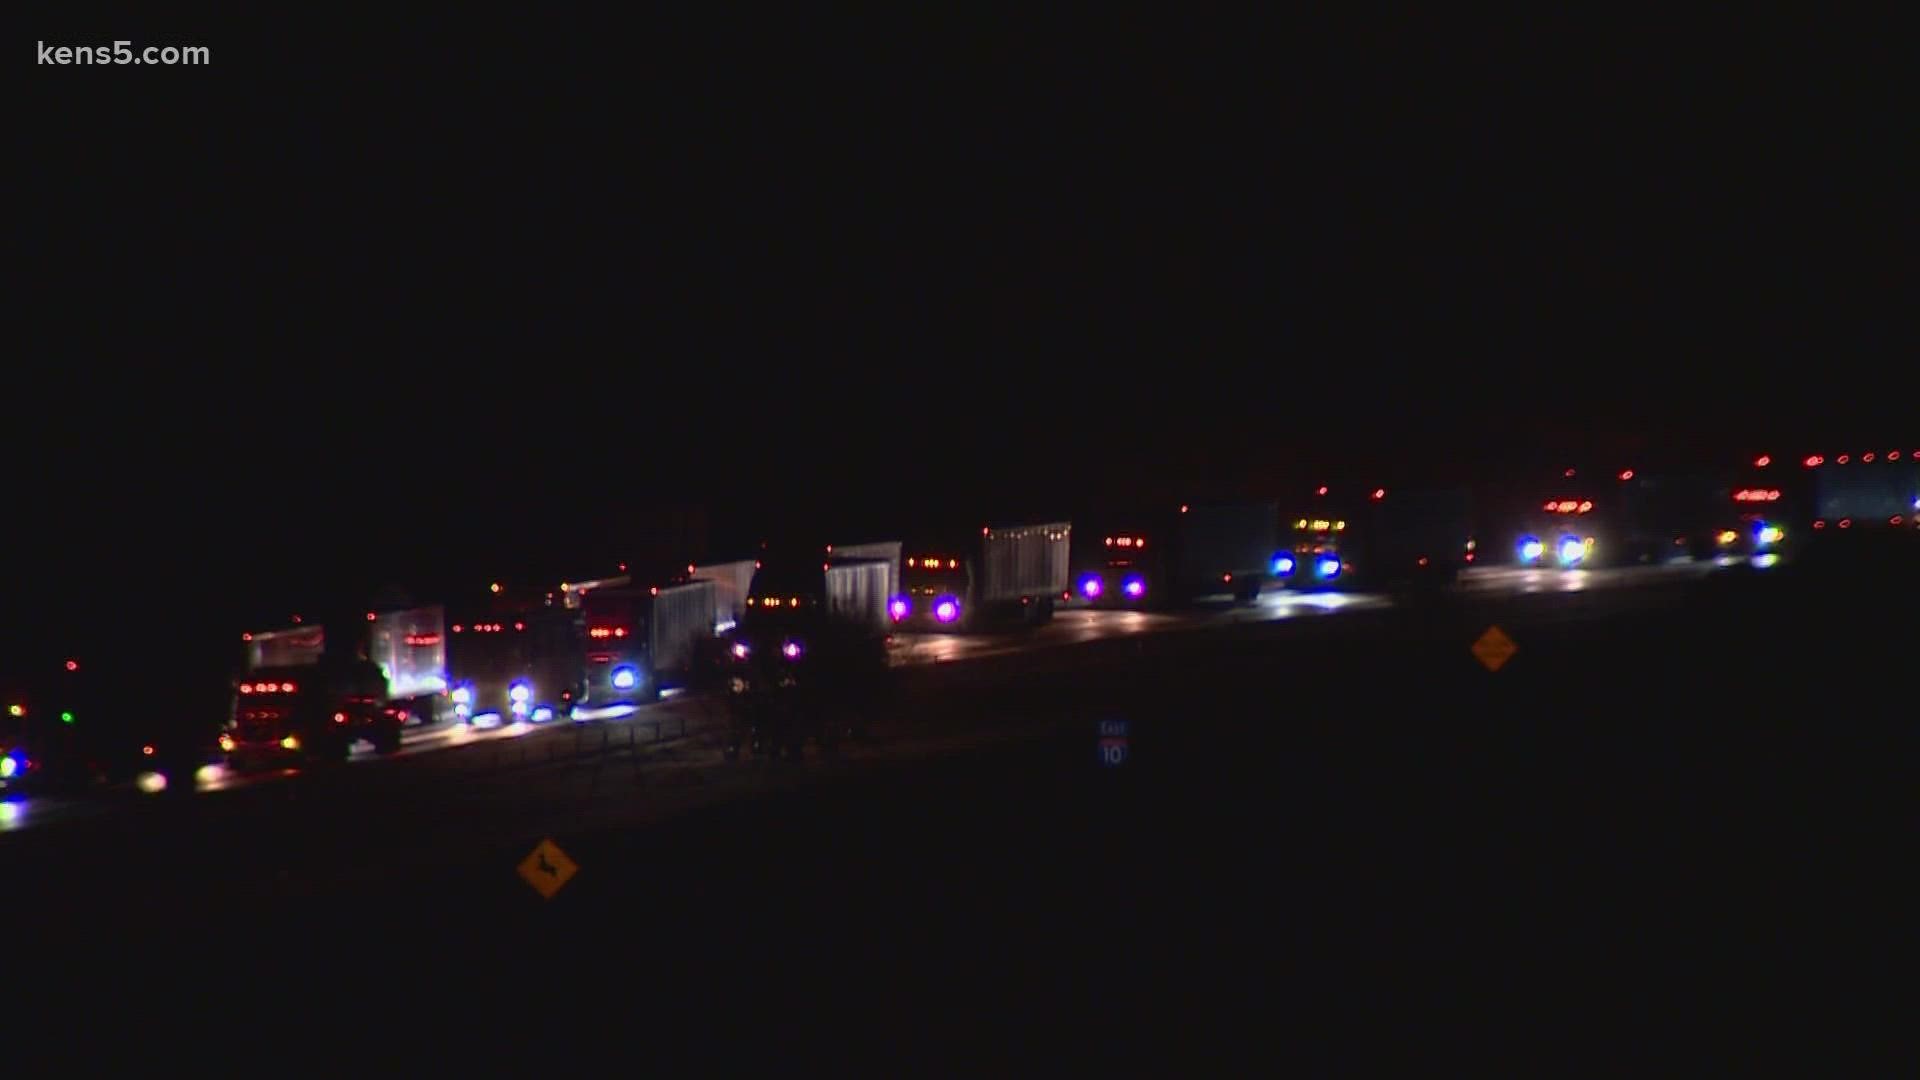 KENS 5's Jeremy Baker provides an update on major crash in Kerrville causing miles of traffic to back up on I-10.